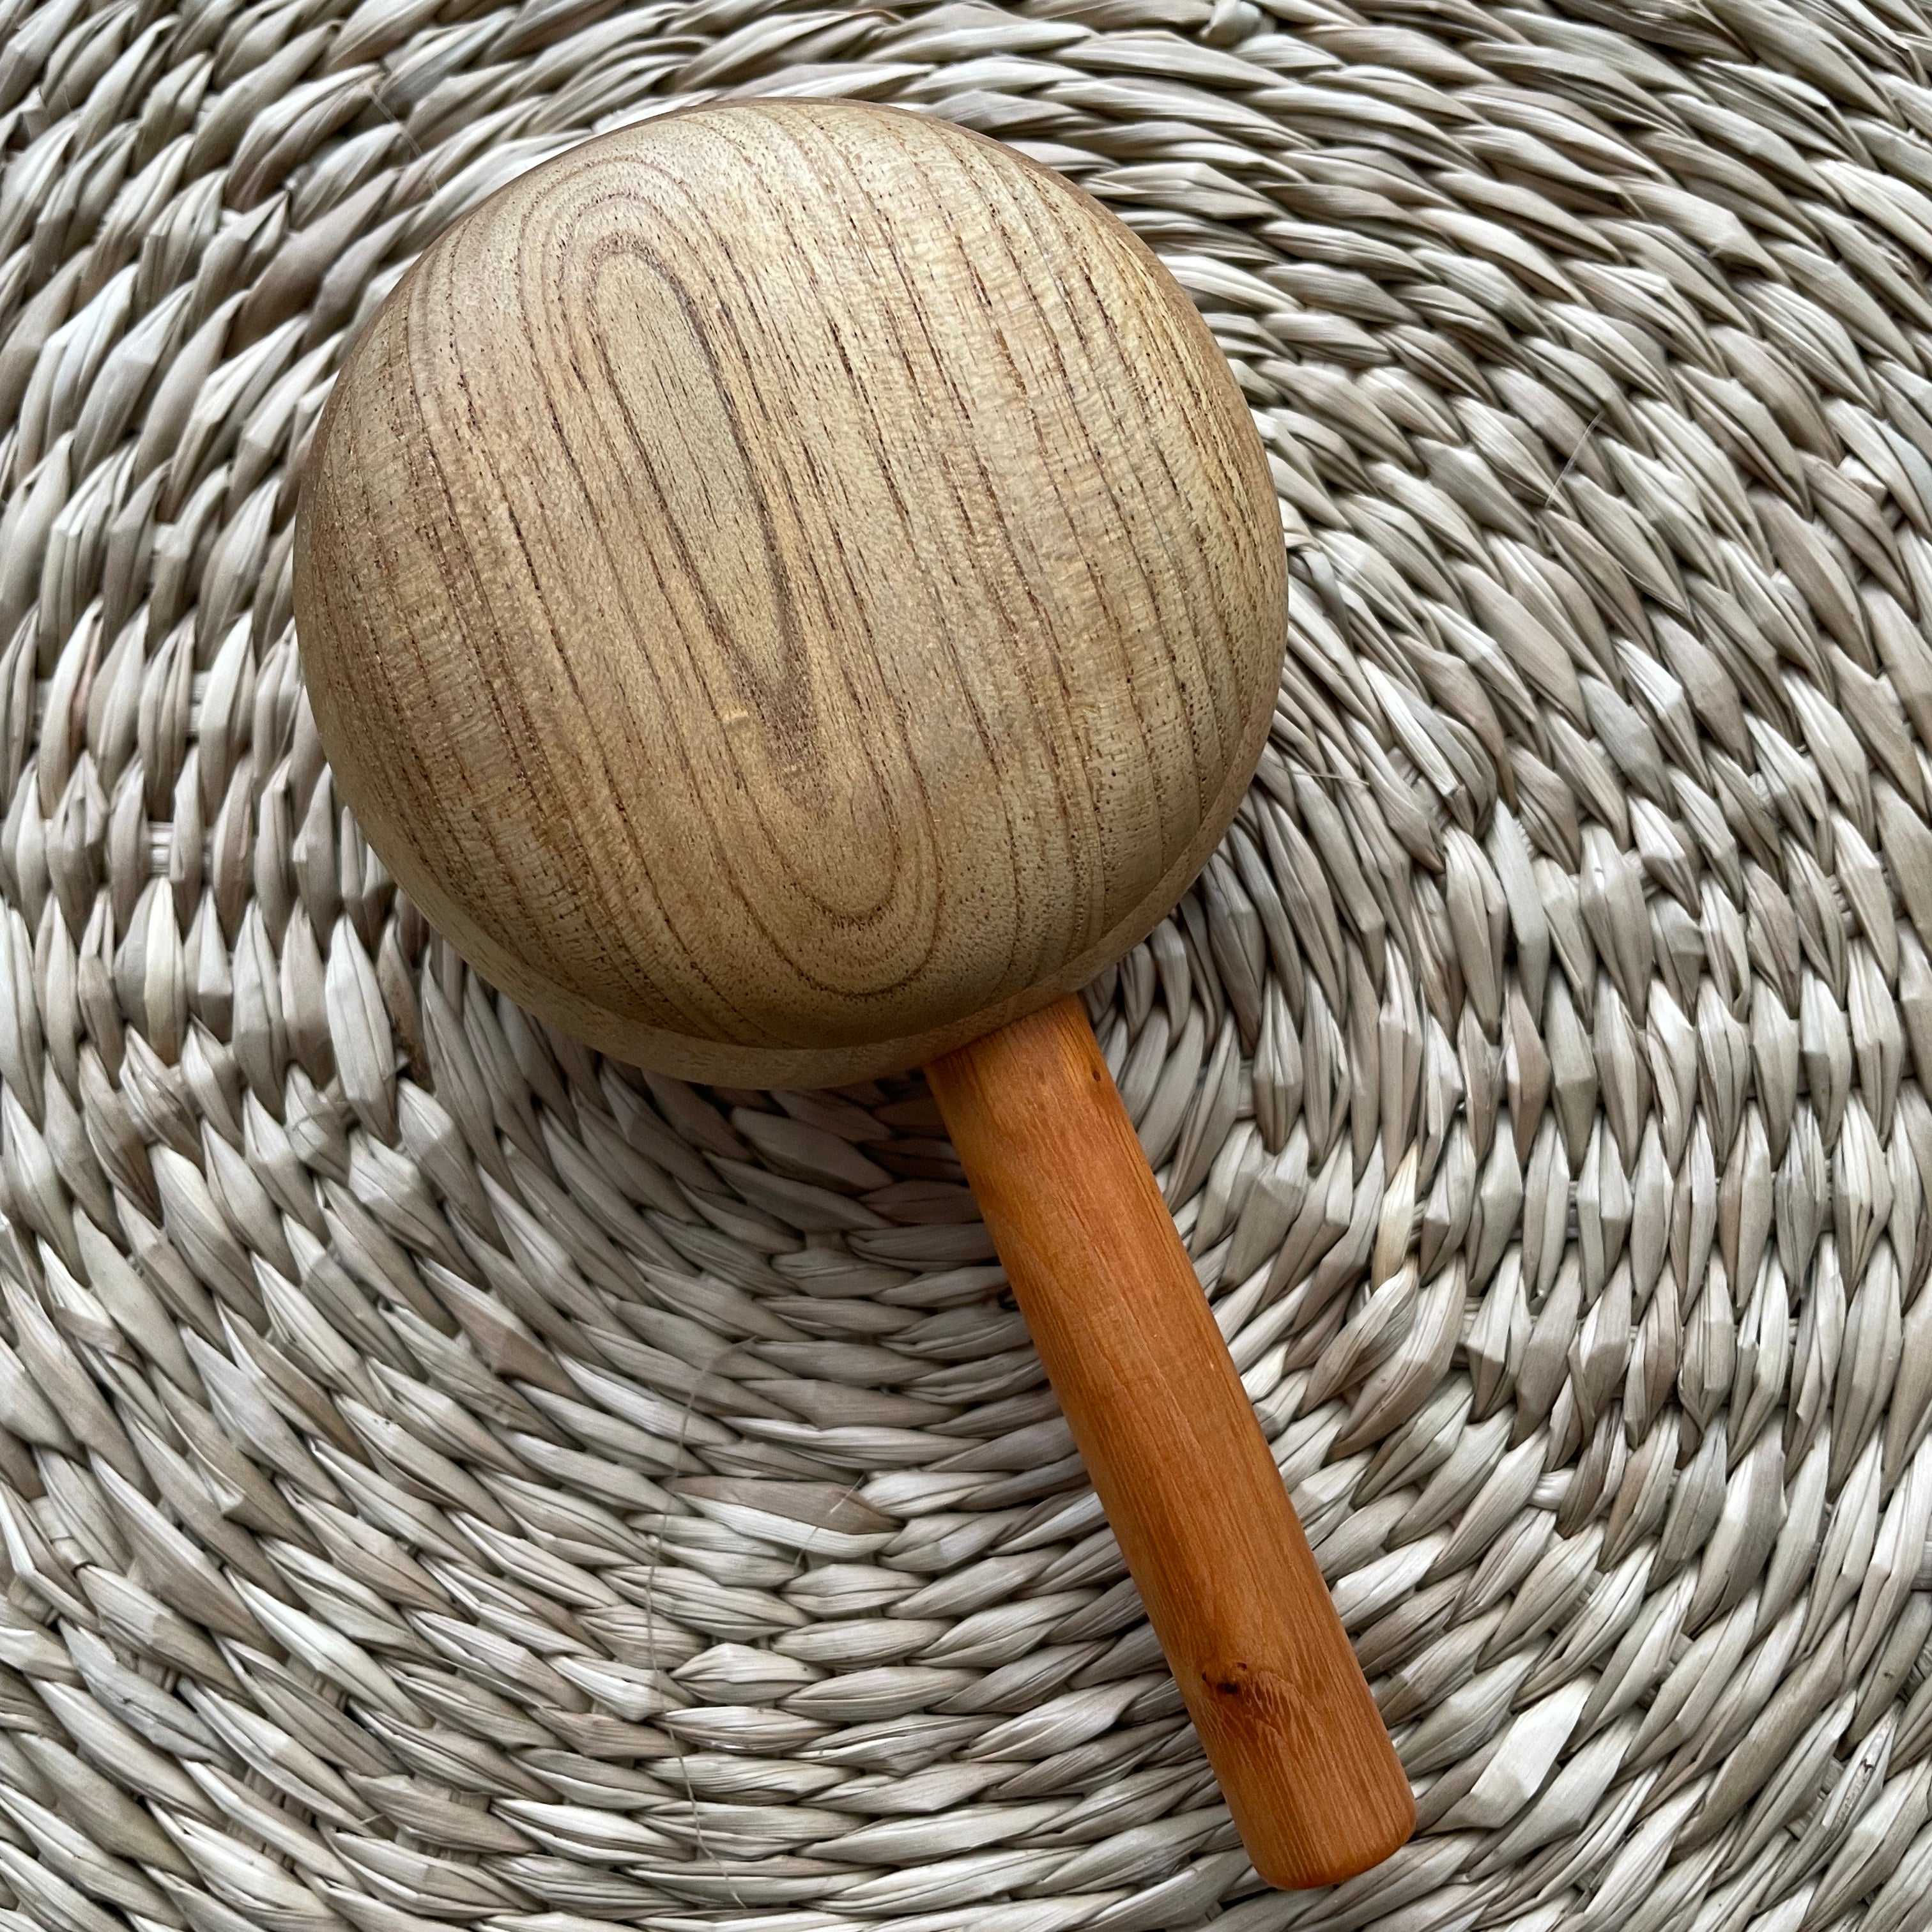 Wooden Popsicle Rattle 3